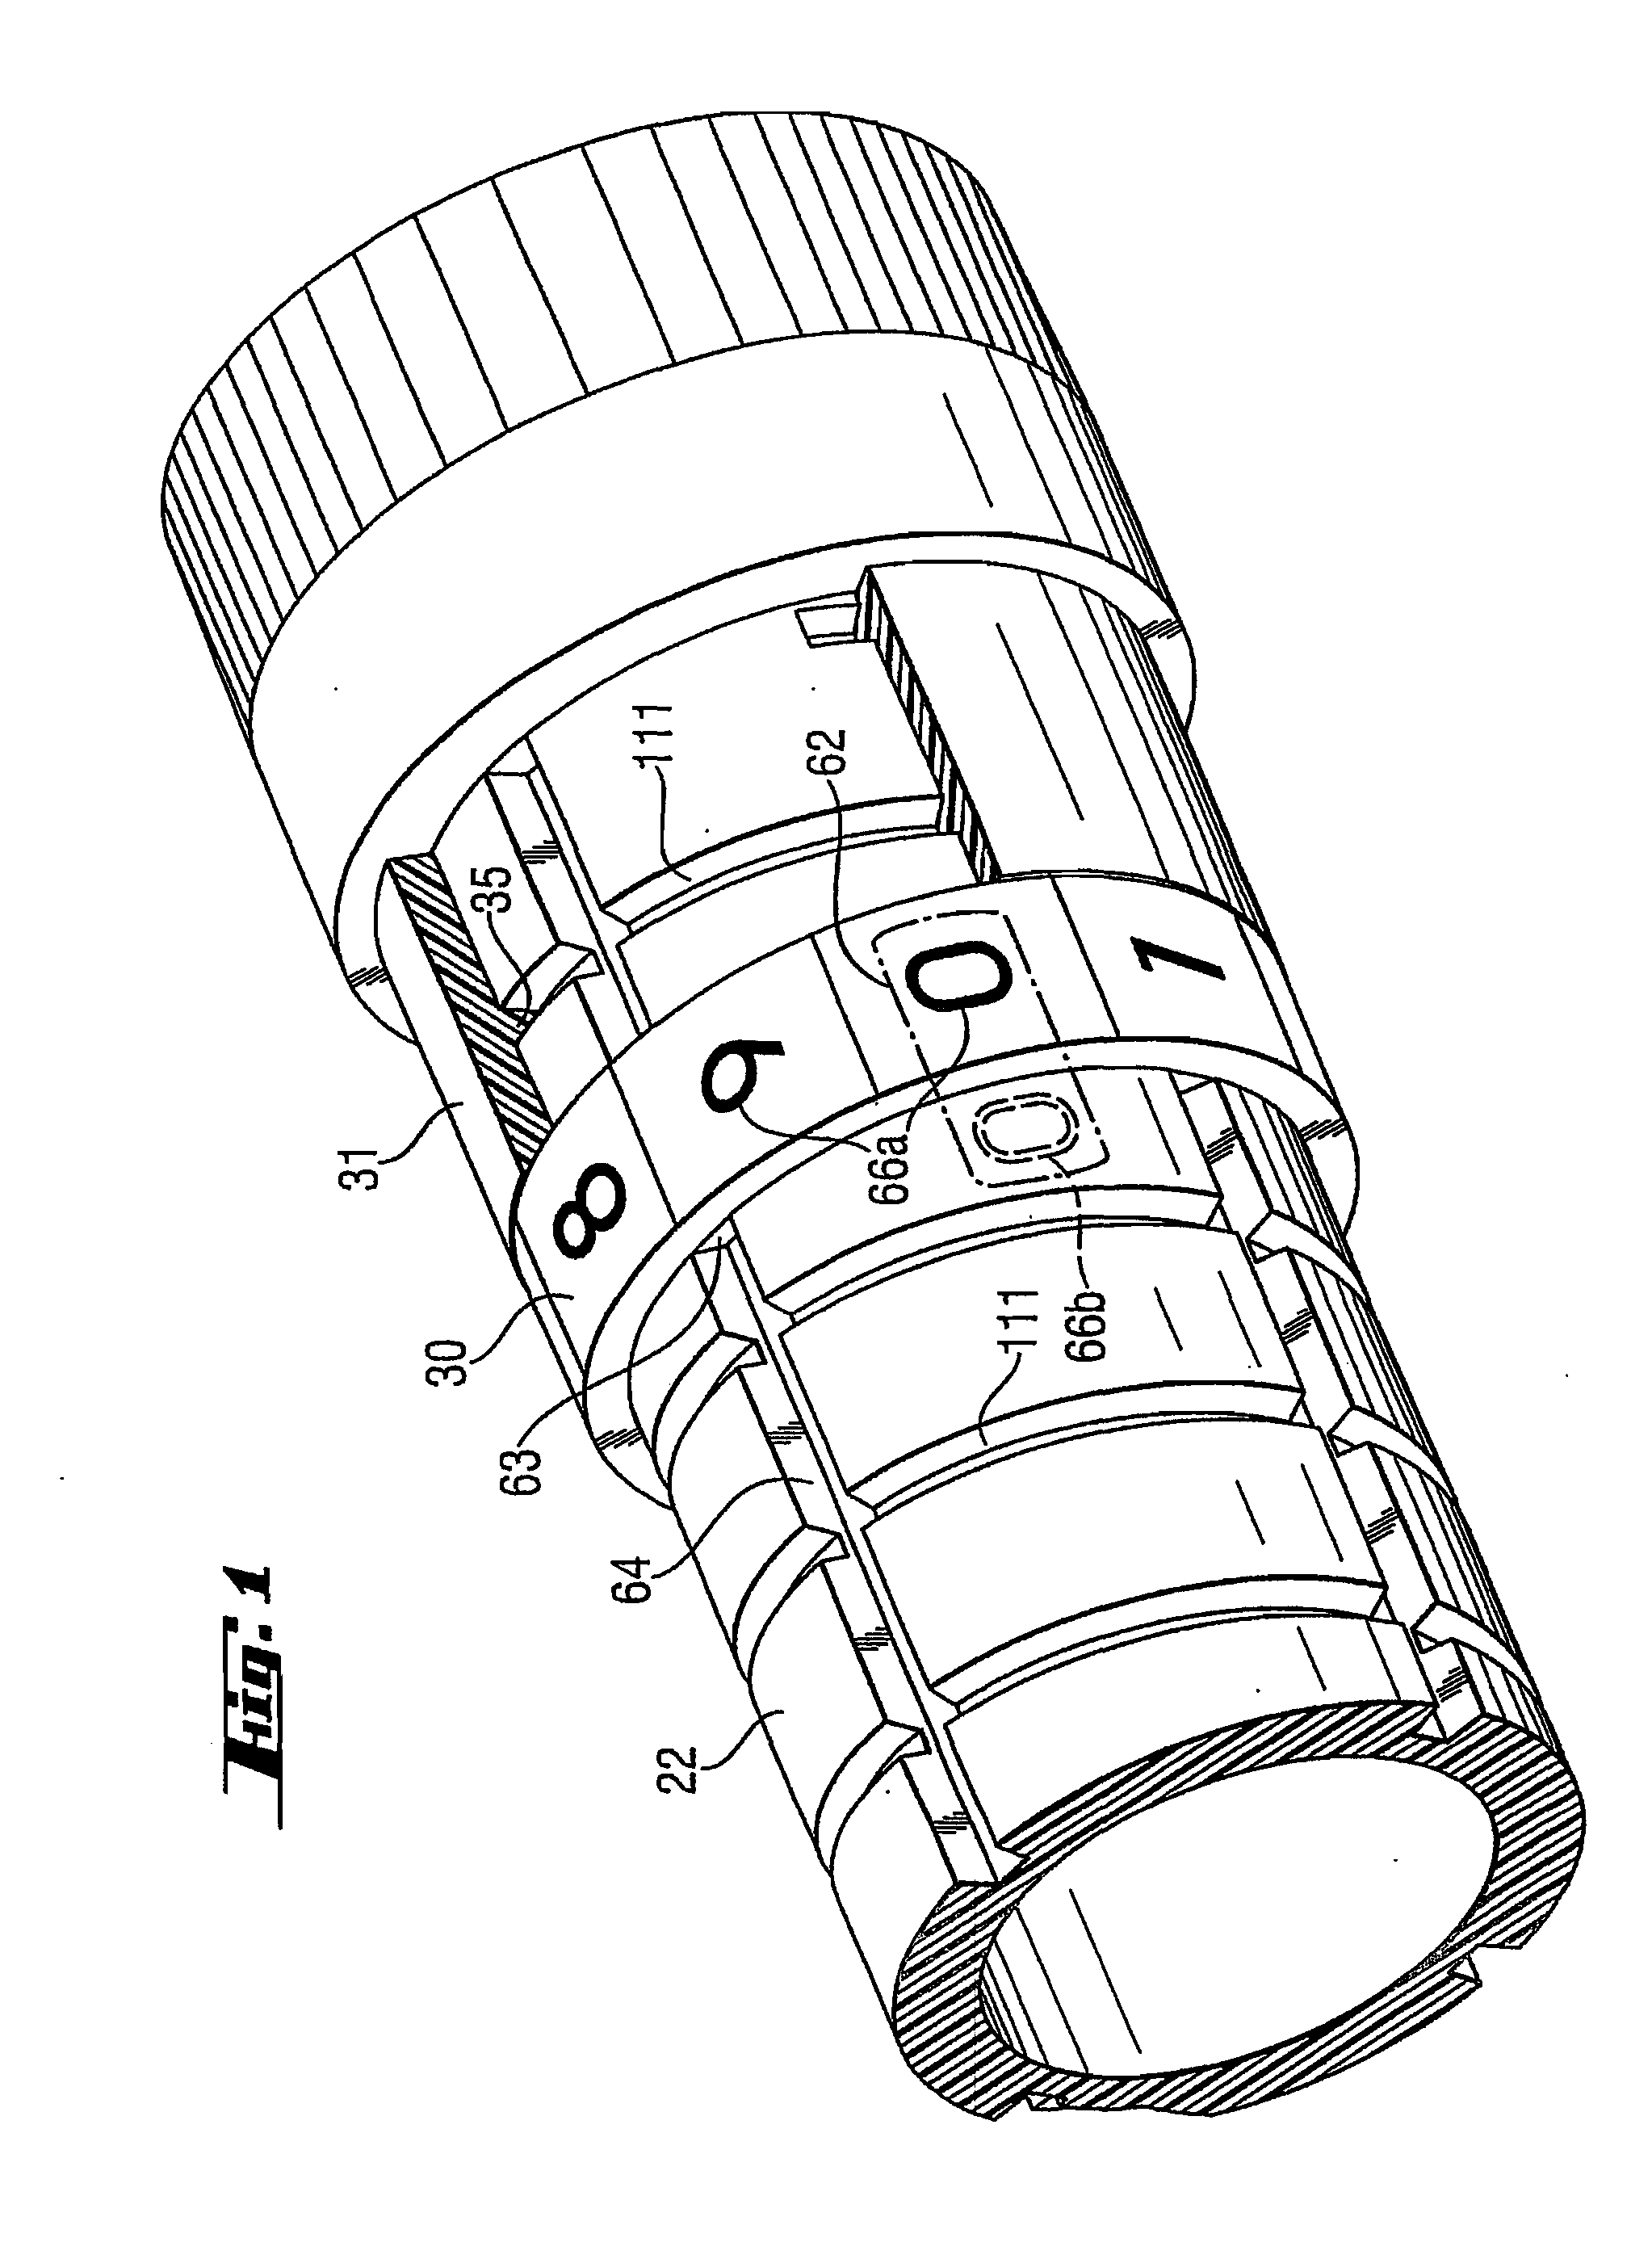 Dose Display Mechanism For A Drug Delivery Device